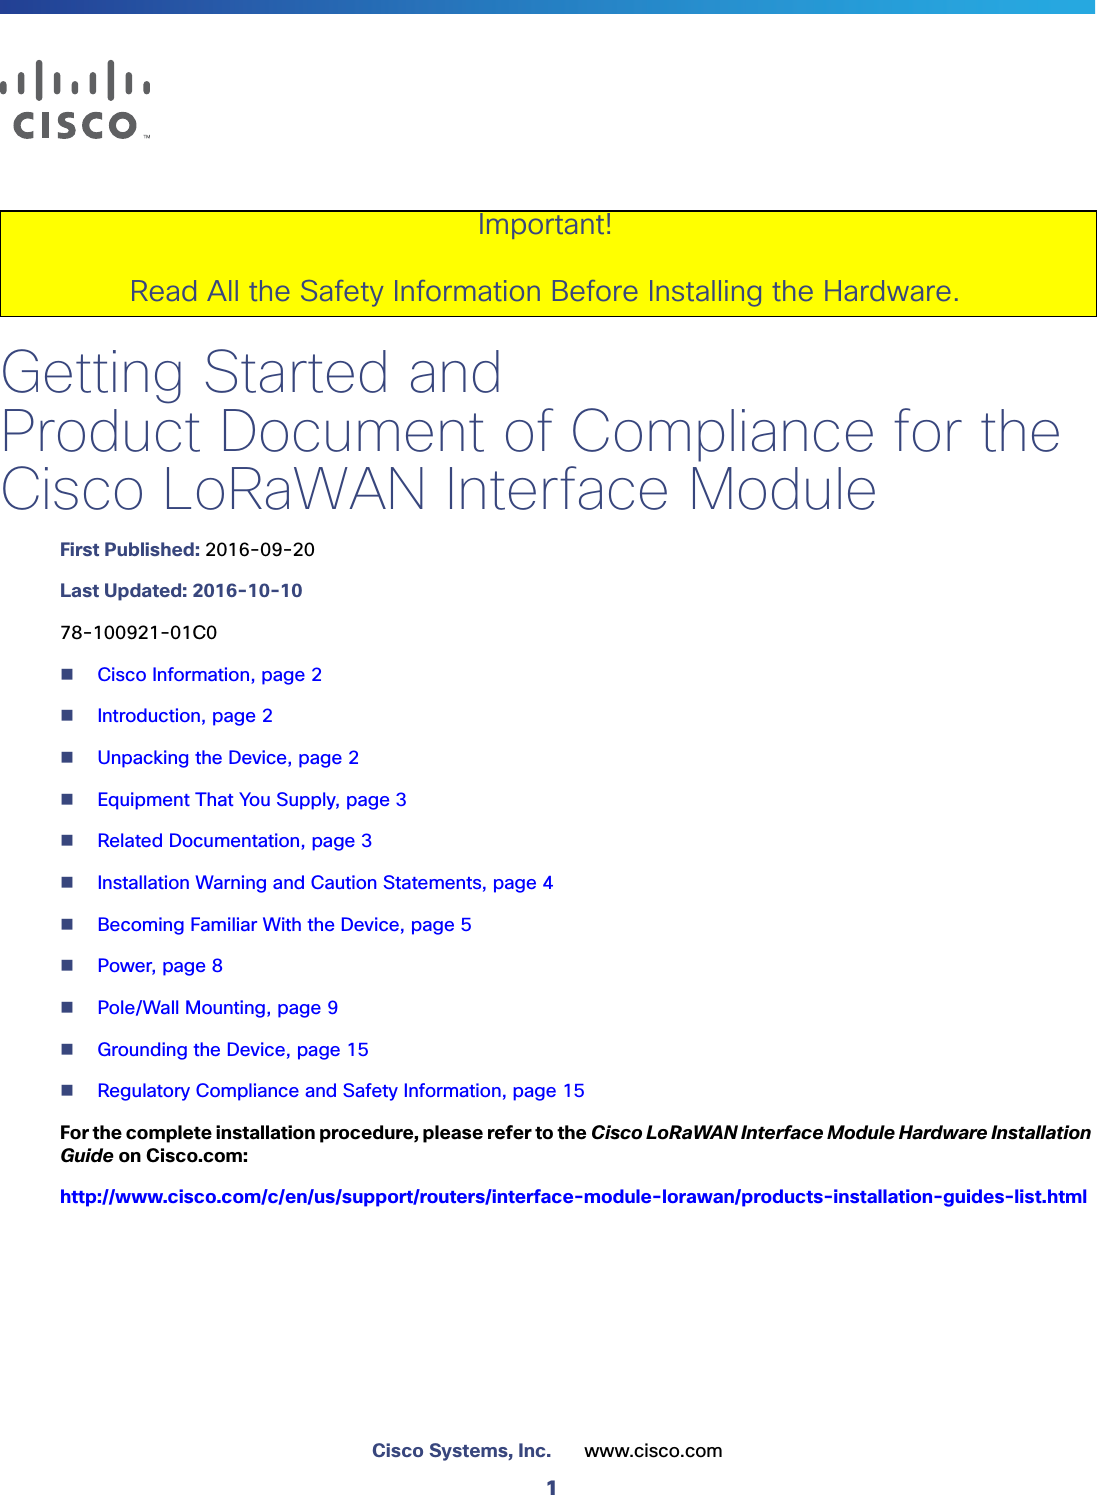 1Cisco Systems, Inc. www.cisco.com Getting Started andProduct Document of Compliance for theCisco LoRaWAN Interface ModuleFirst Published: 2016-09-20Last Updated: 2016-10-1078-100921-01C0Cisco Information, page 2Introduction, page 2Unpacking the Device, page 2Equipment That You Supply, page 3Related Documentation, page 3Installation Warning and Caution Statements, page 4Becoming Familiar With the Device, page 5Power, page 8Pole/Wall Mounting, page 9Grounding the Device, page 15Regulatory Compliance and Safety Information, page 15For the complete installation procedure, please refer to the Cisco LoRaWAN Interface Module Hardware Installation Guide on Cisco.com:http://www.cisco.com/c/en/us/support/routers/interface-module-lorawan/products-installation-guides-list.htmlImportant!Read All the Safety Information Before Installing the Hardware.